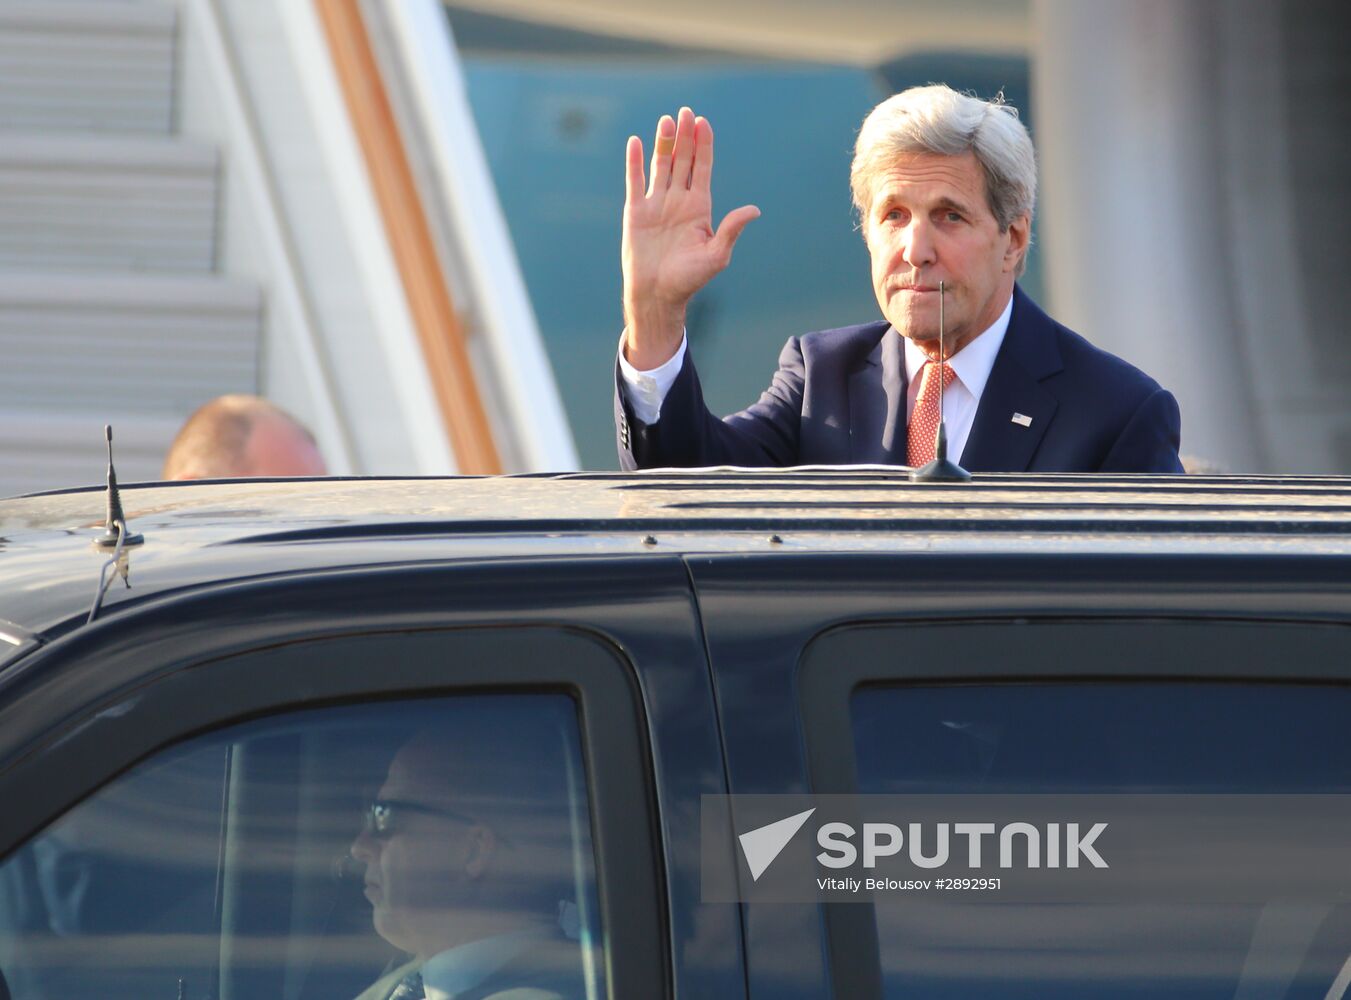 US Secretary of State John Kerry arrives in Moscow